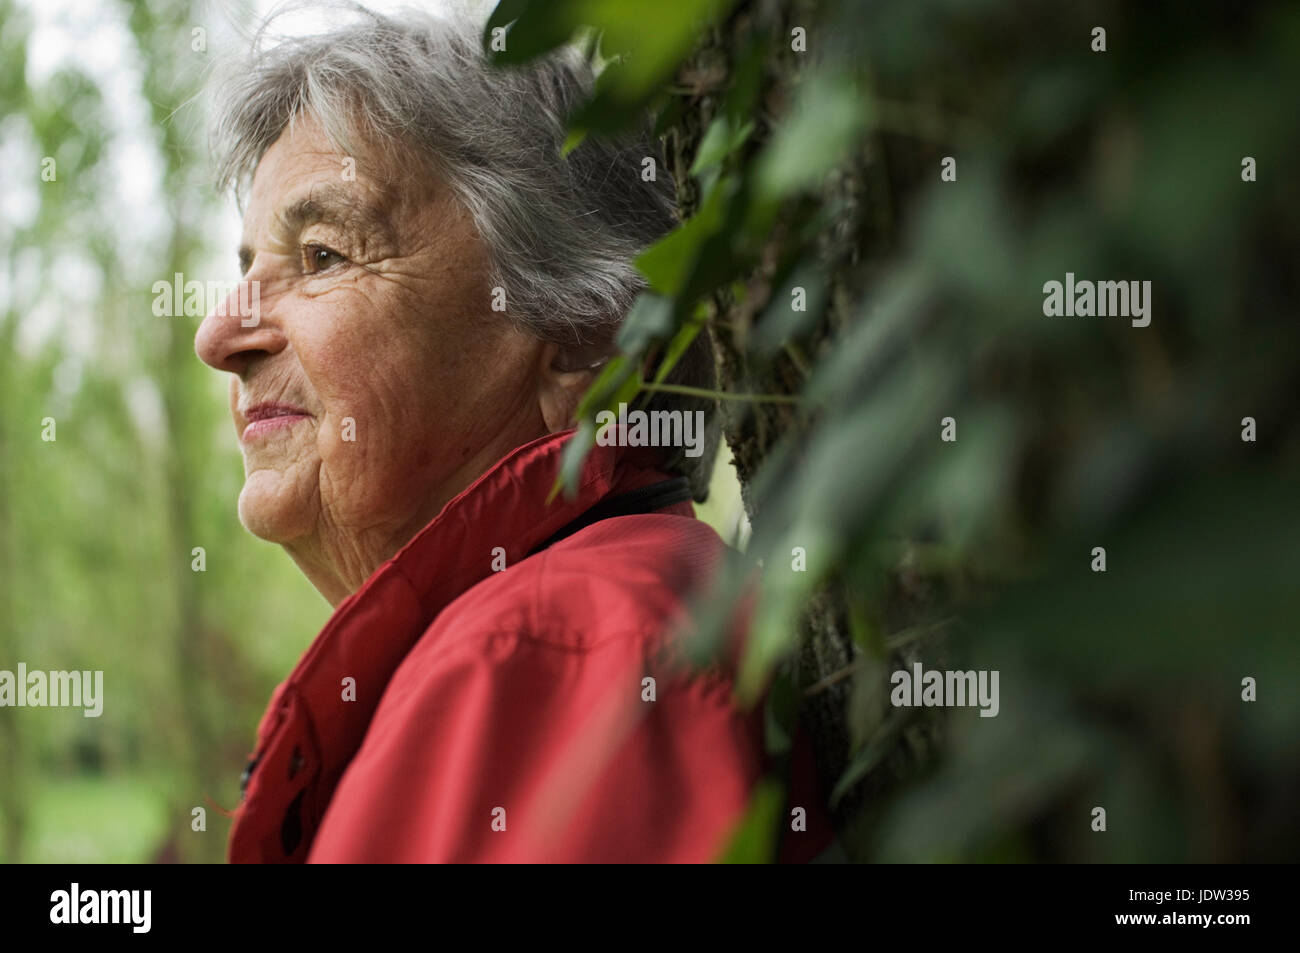 Older woman leaning on tree in park Stock Photo